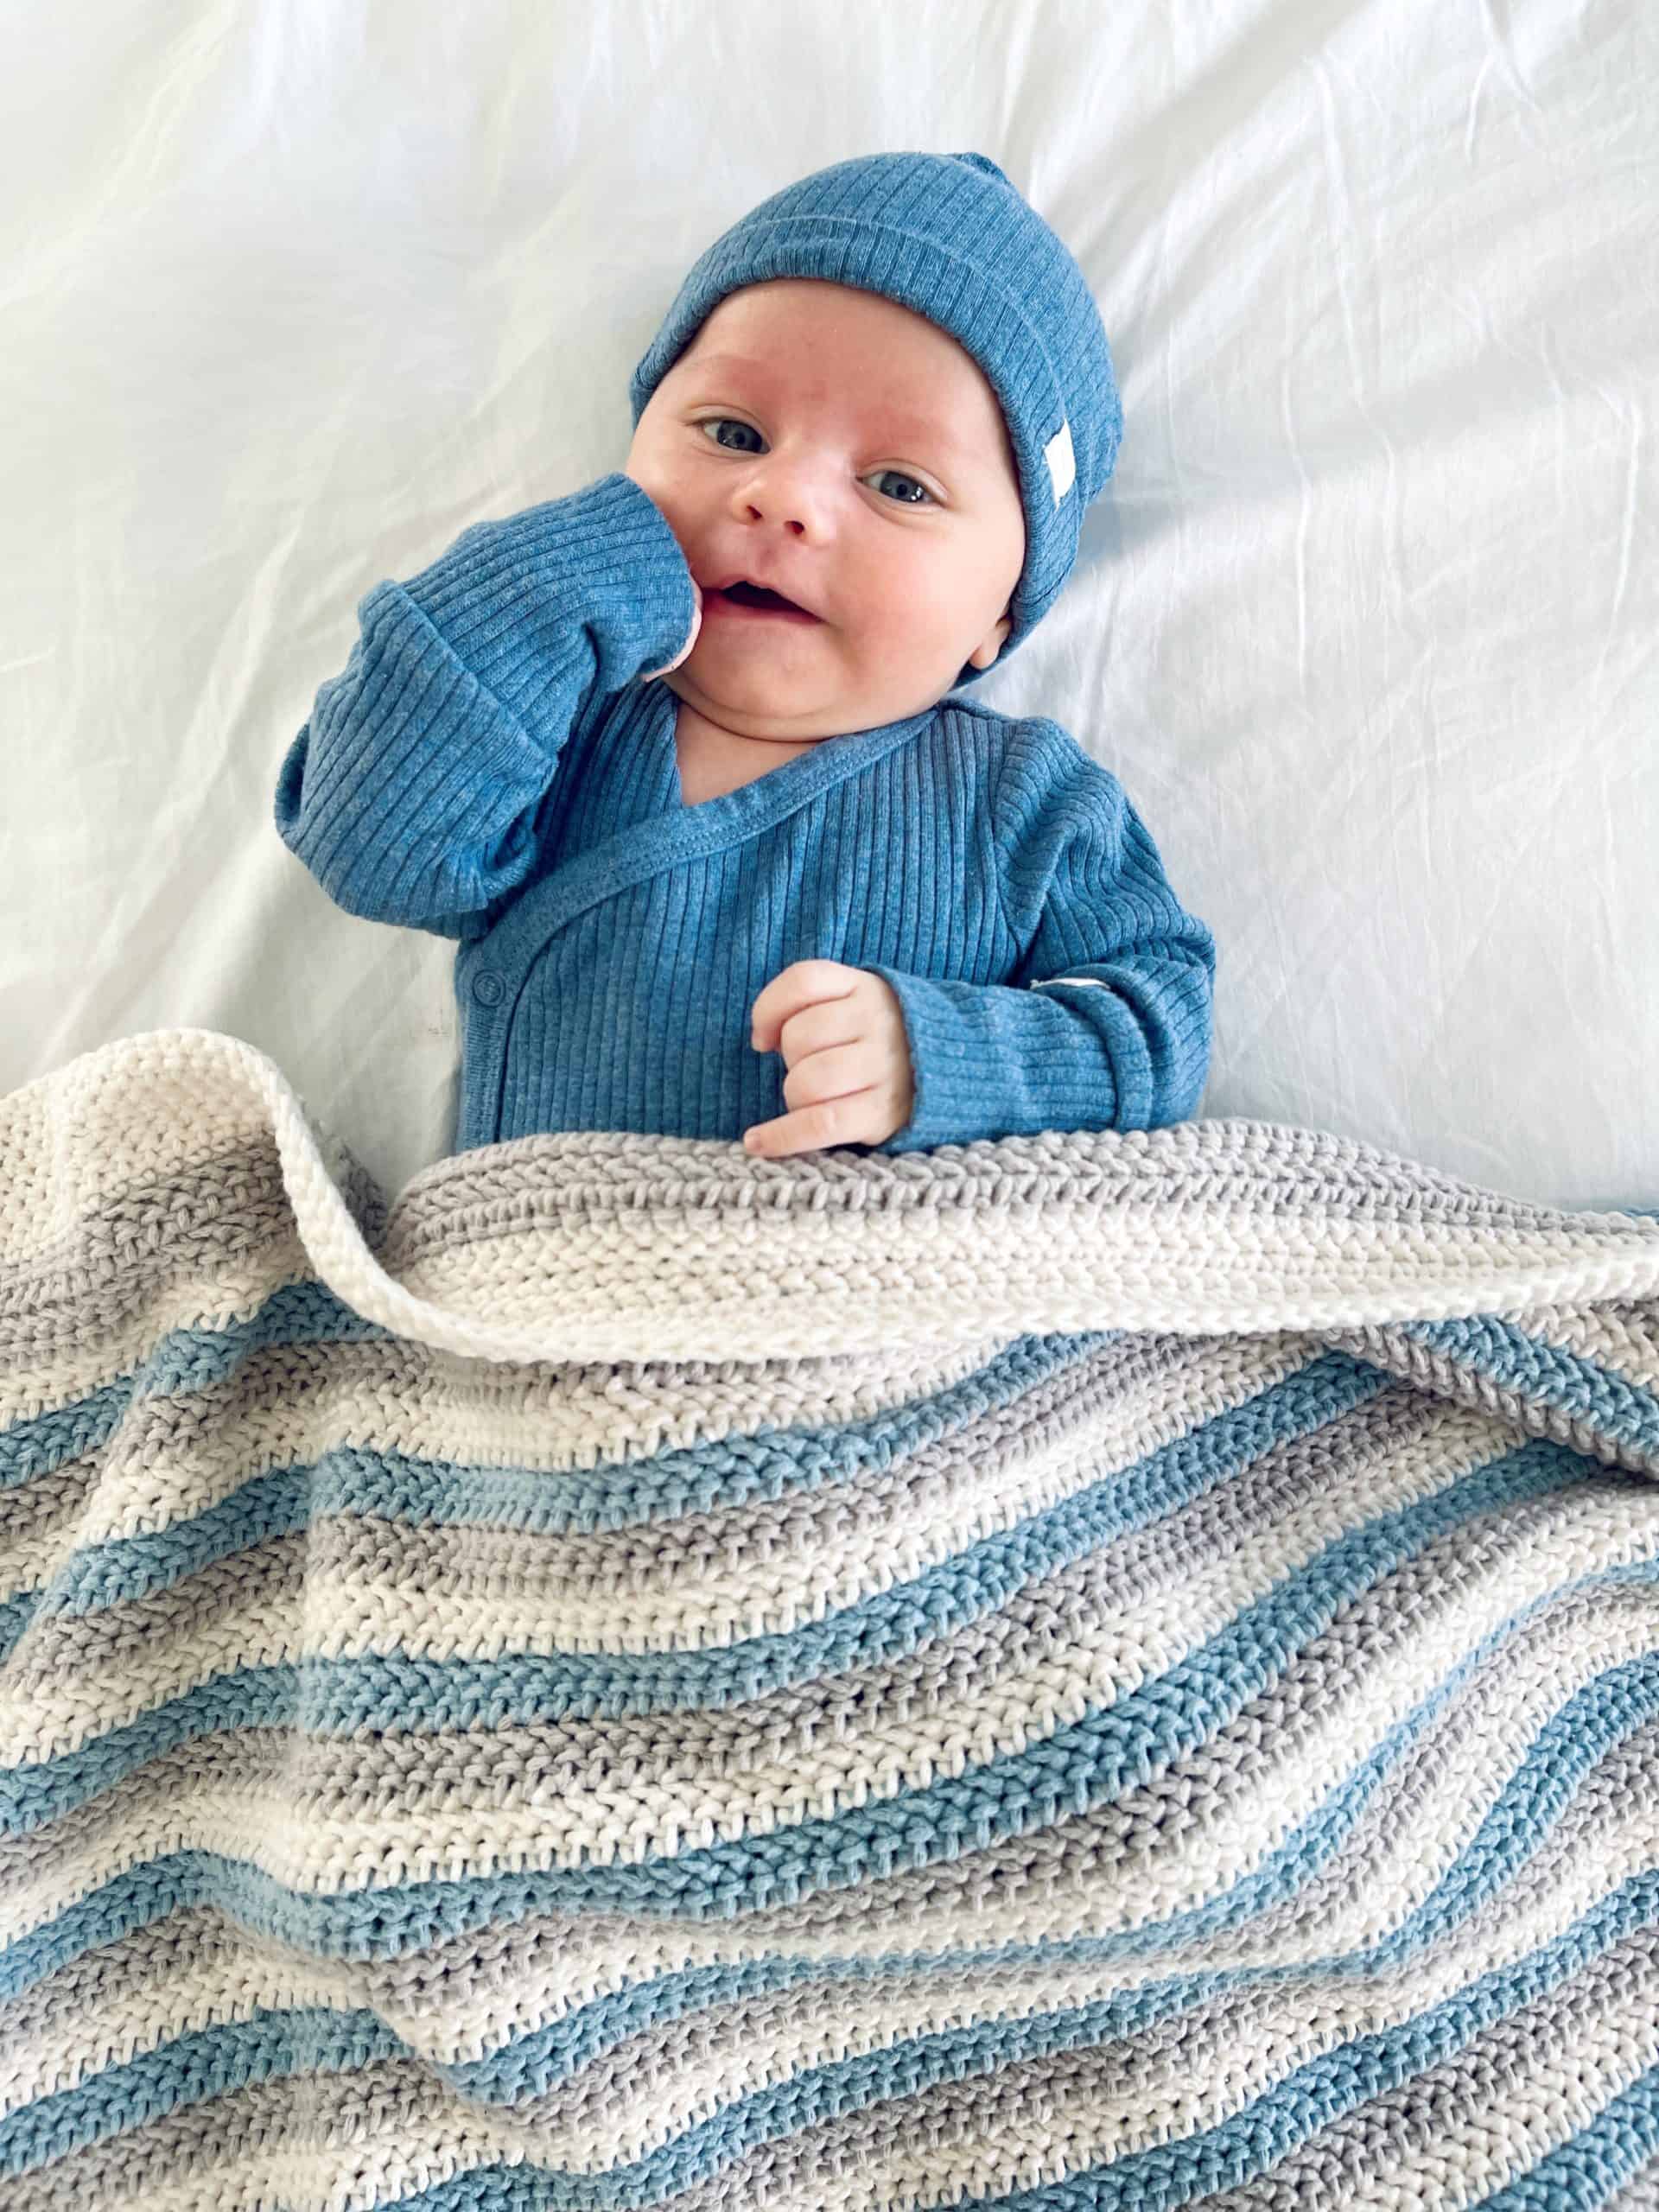 Crochet Baby James Blanket made by Annie - Daisy Farm Crafts